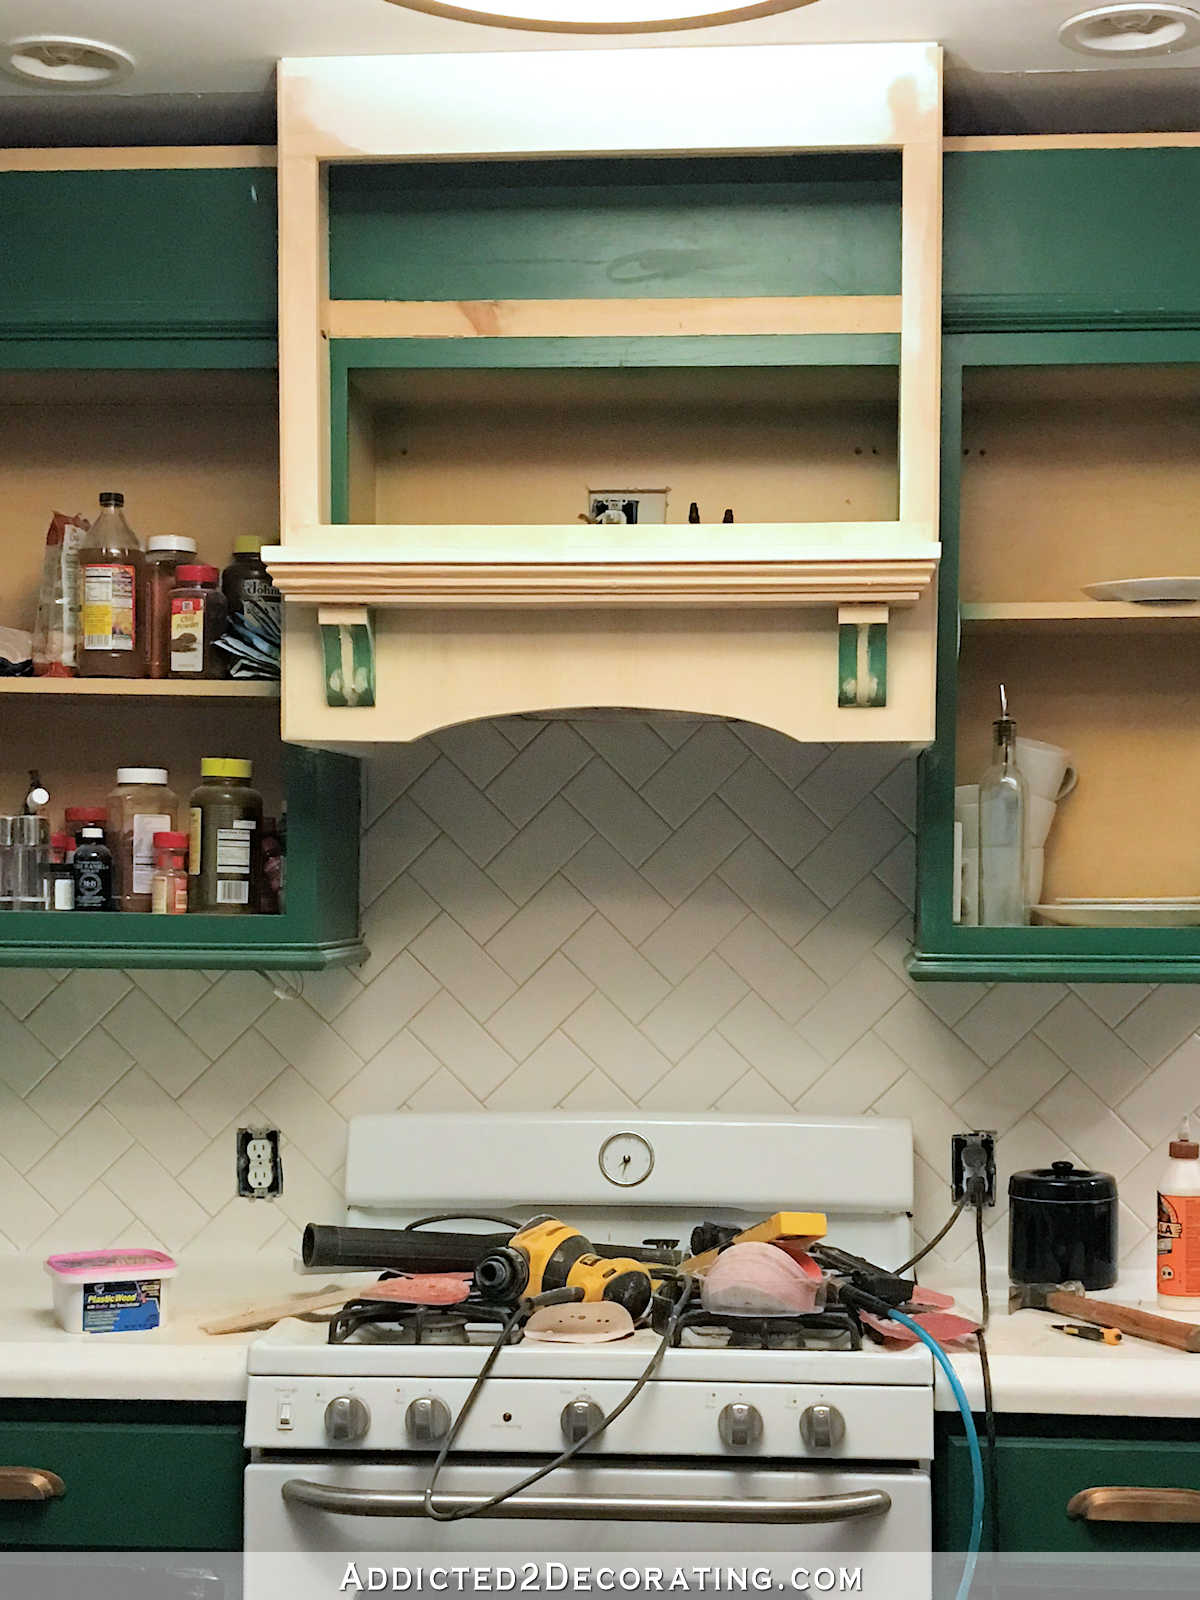 how to build a custom wood range hood cover - 29 - make sure combustible material is at least 30 inches from the stove top